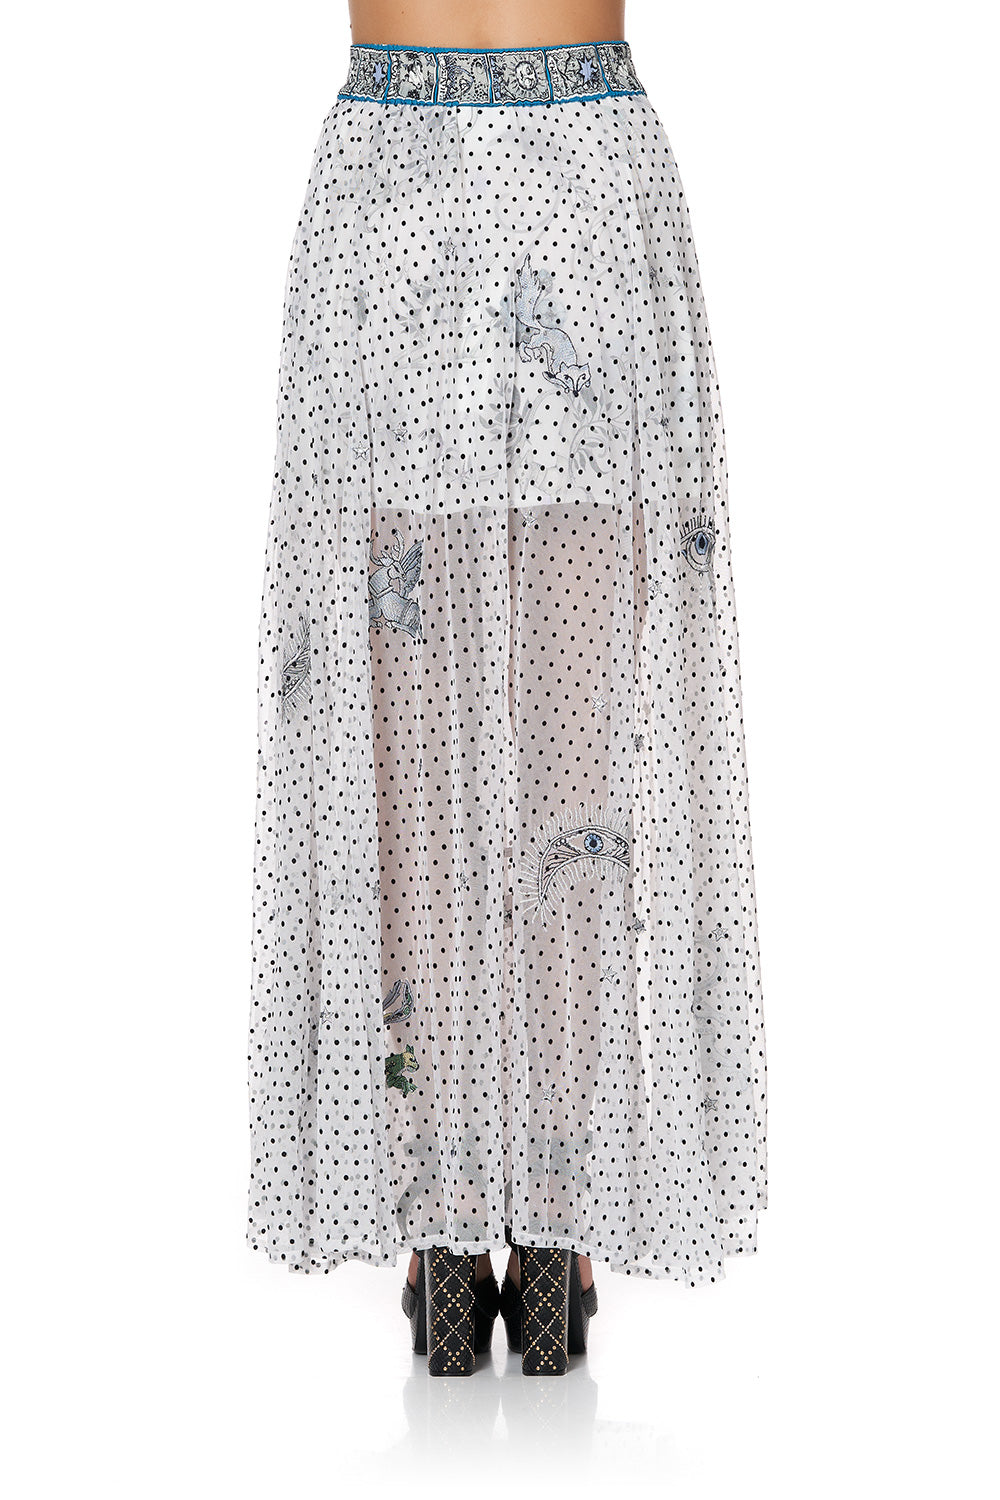 FULL SKIRT WITH GATHERED FRONT PANEL MOONLIT MUSINGS